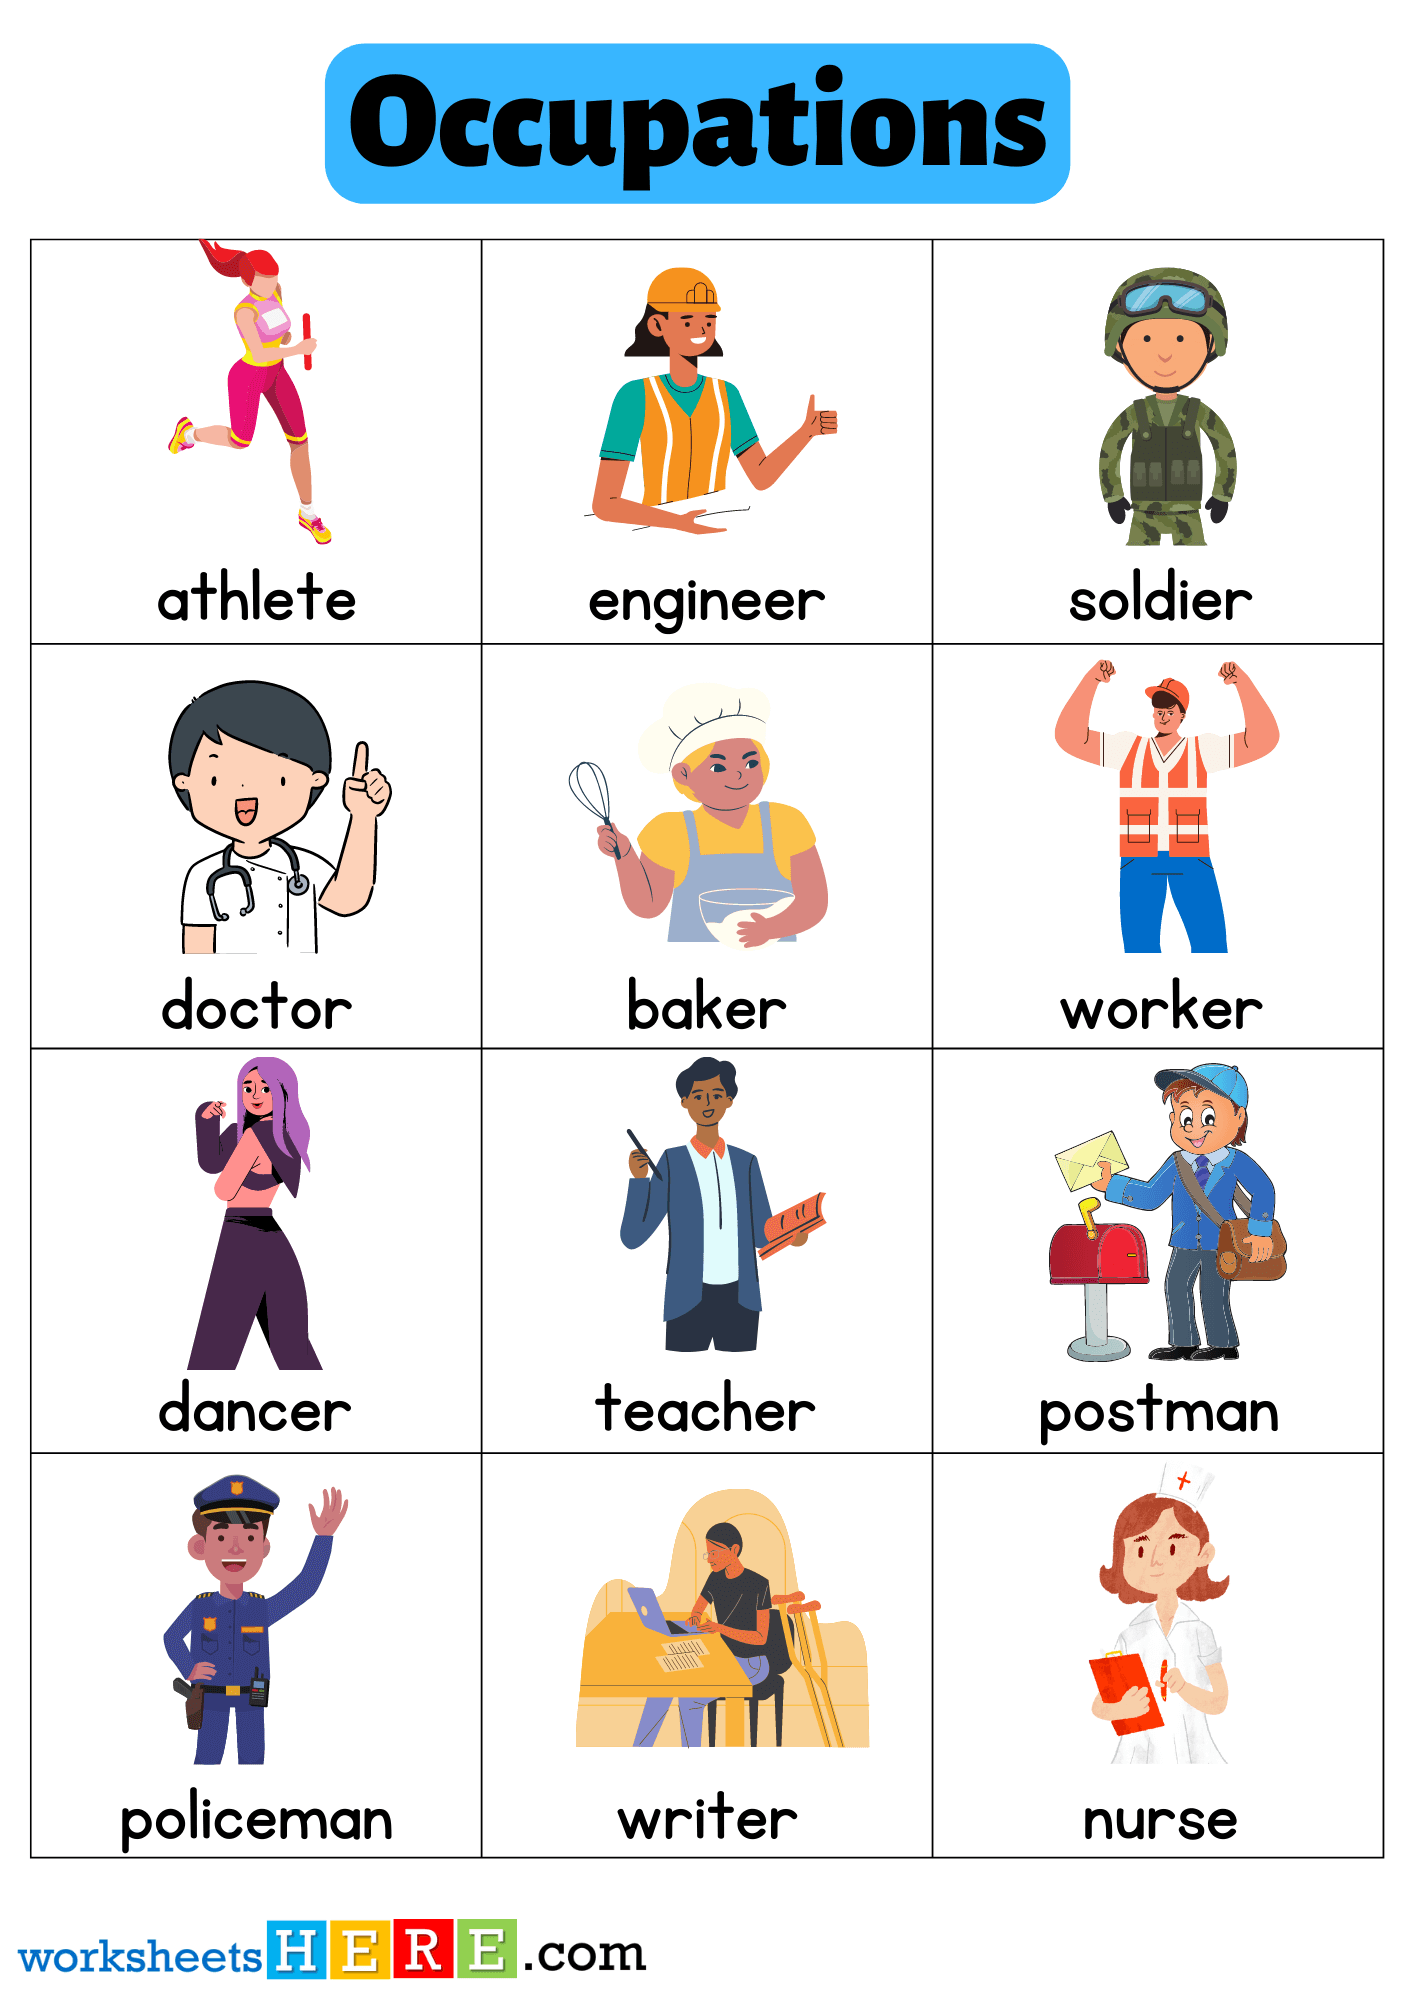 Occupations Names with Pictures, Occupations Flashcards PDF Worksheets For Kindergarten